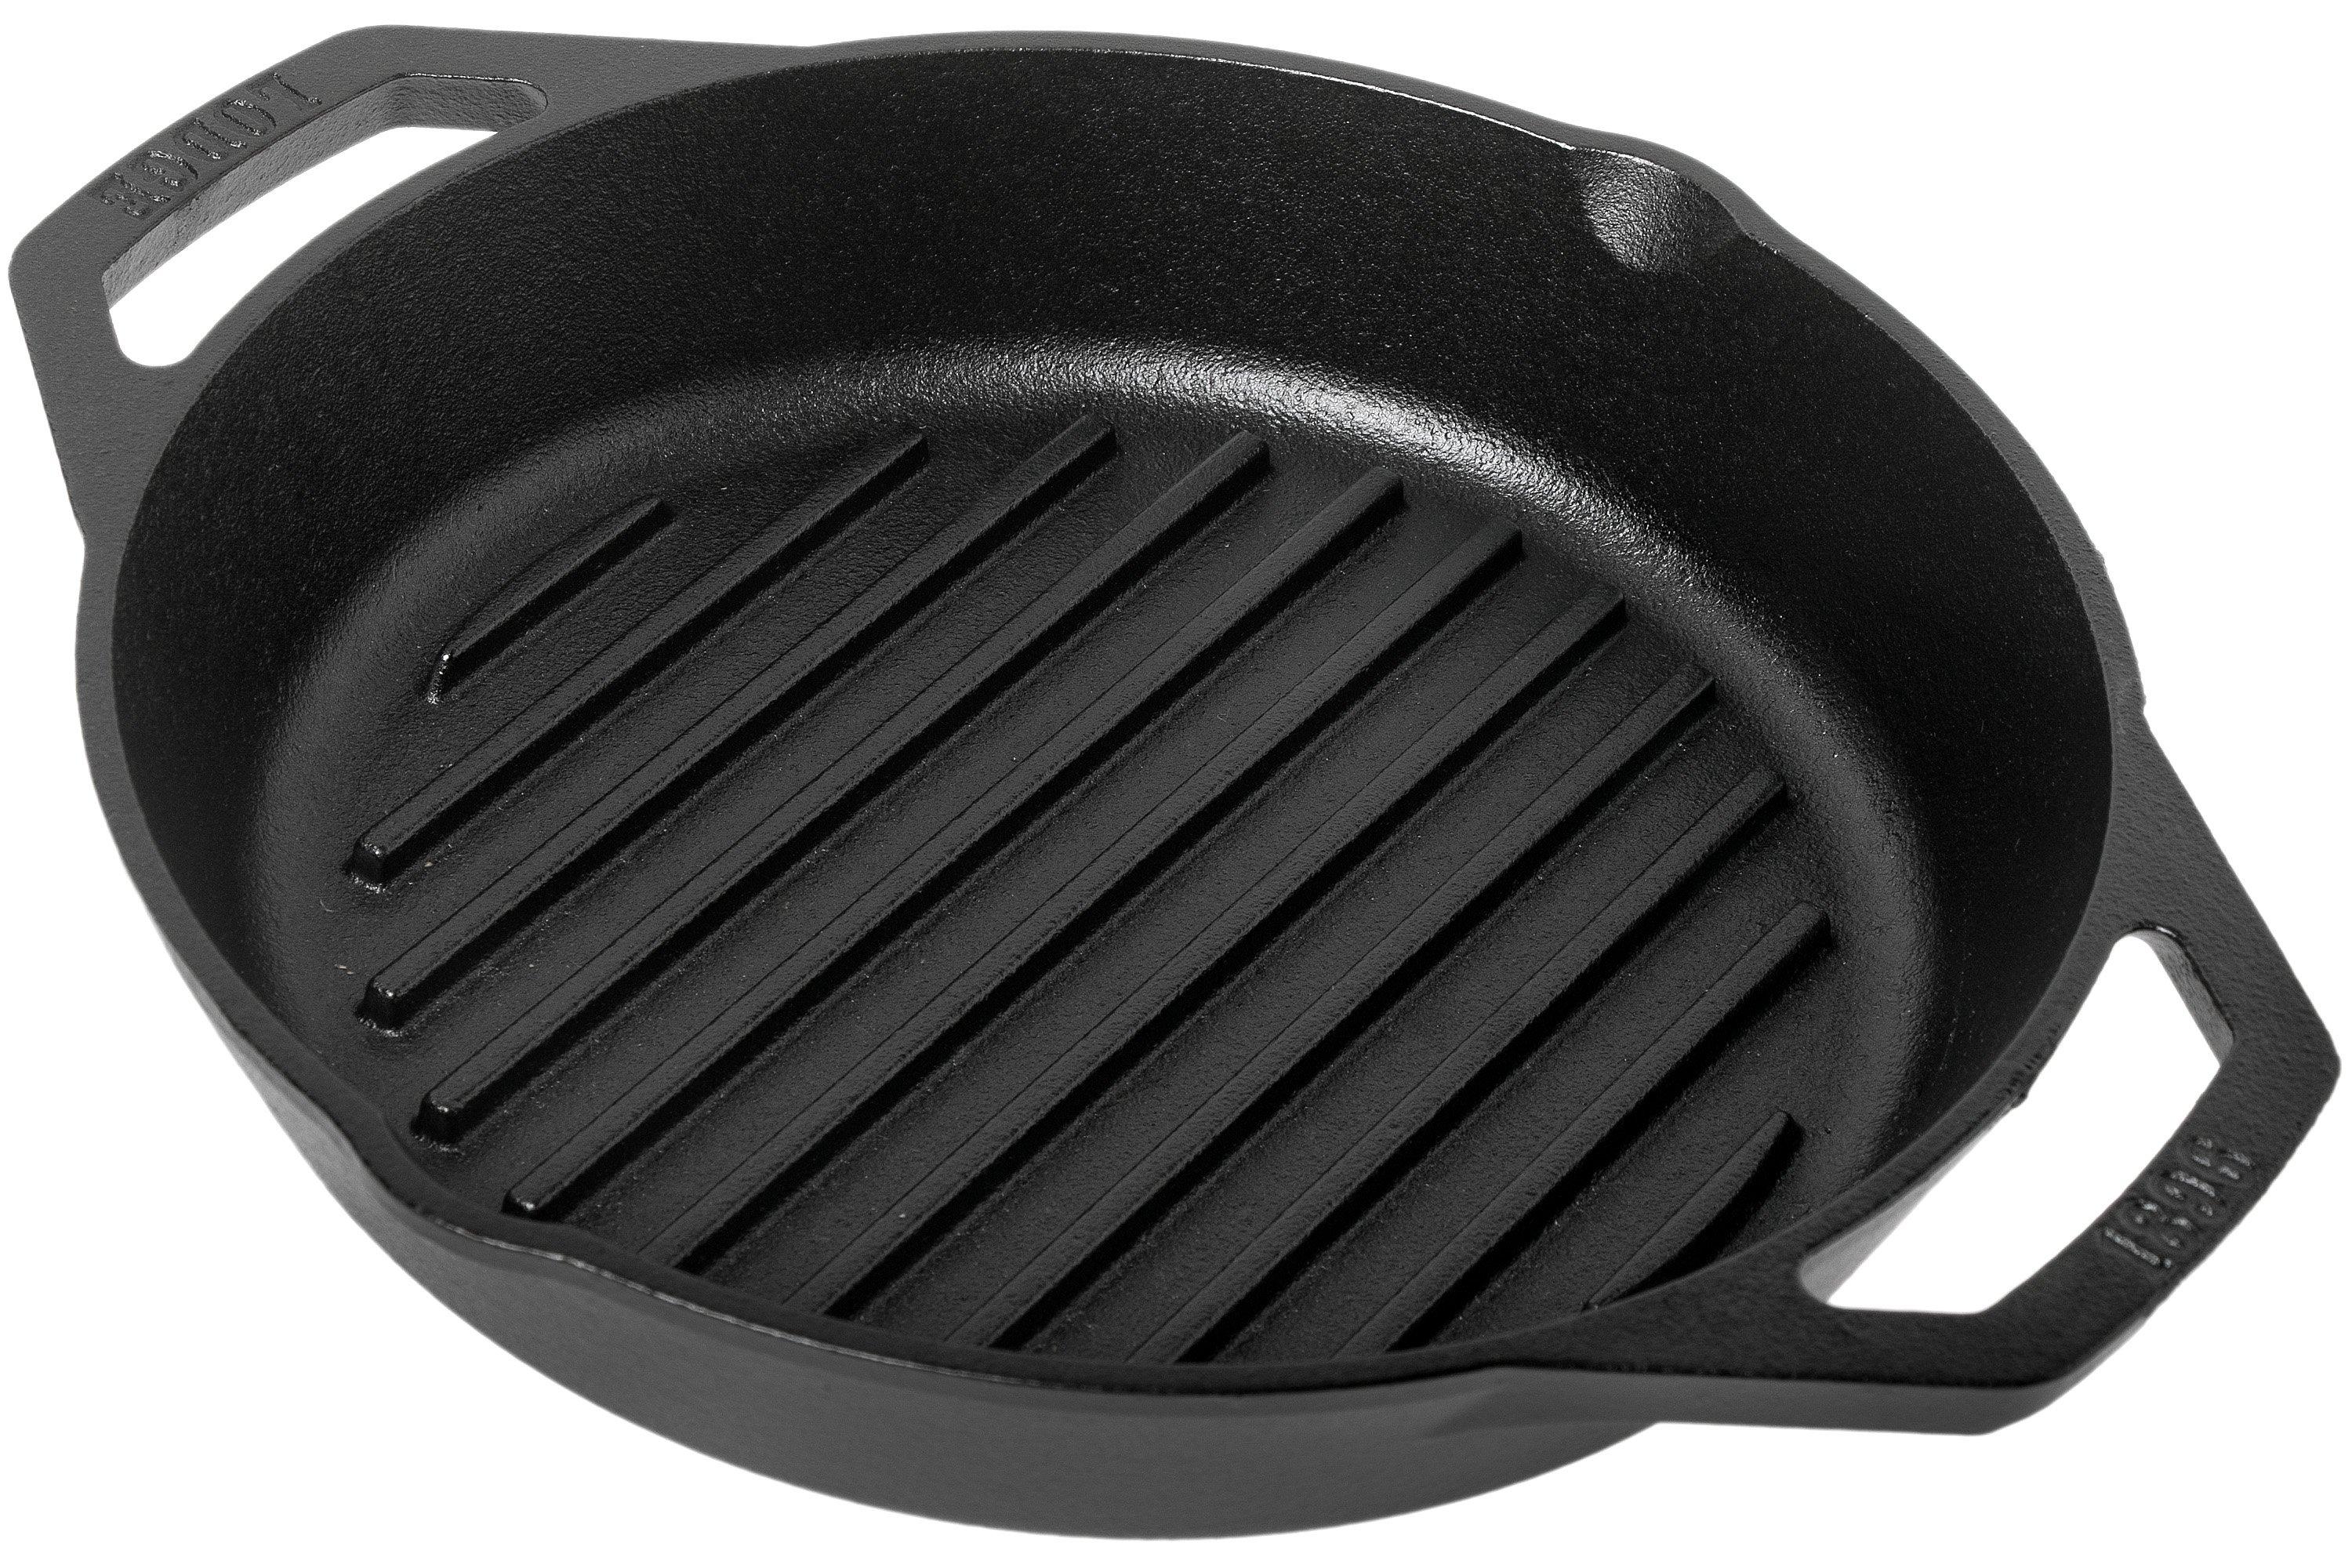 Lodge frying pan/grill pan with two handles L8GPL, diameter approx